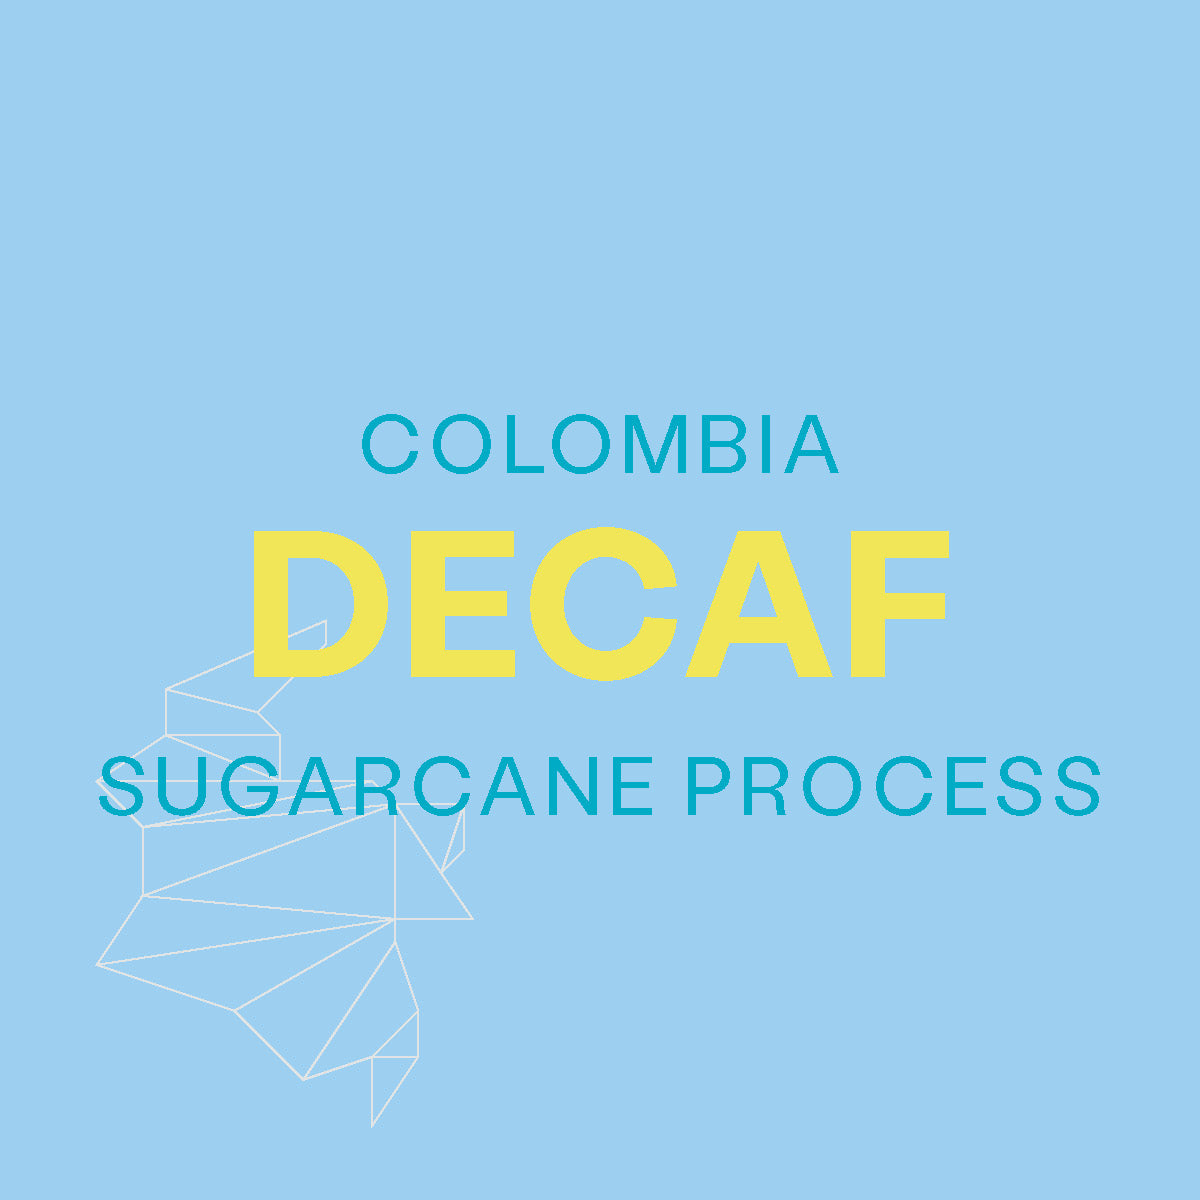 DECAF: Colombia